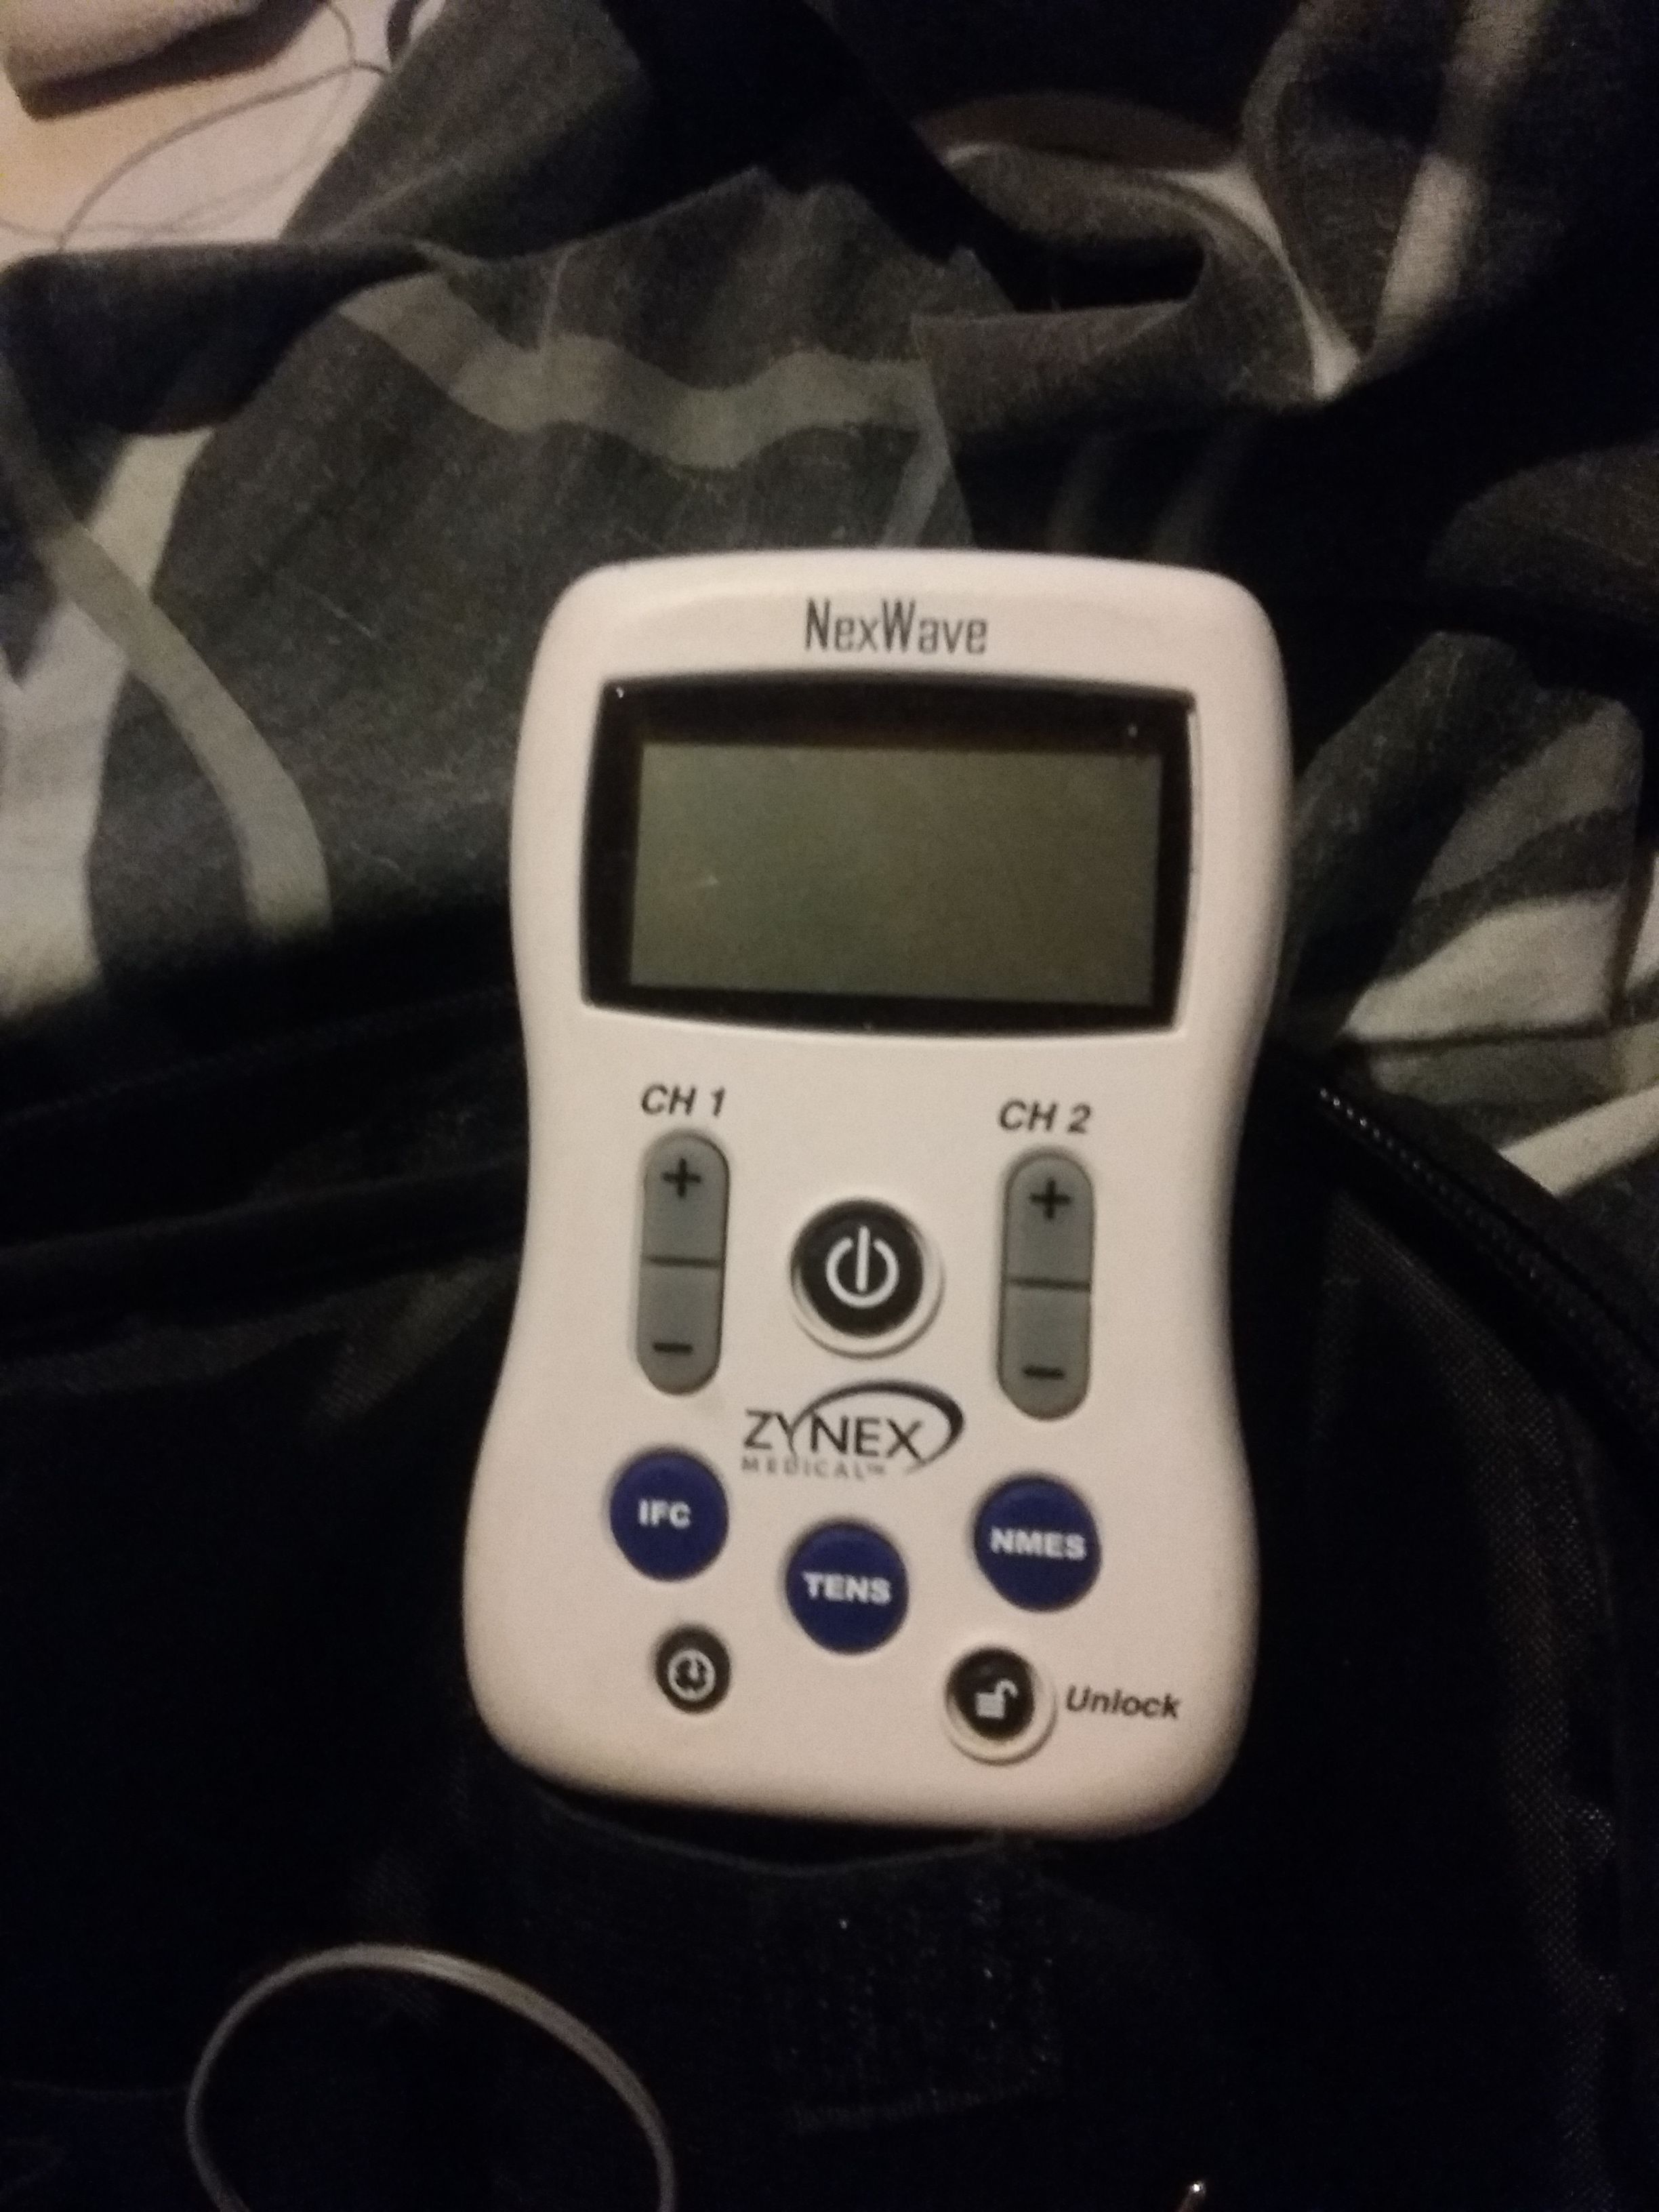 Zynex NexWave Tens Unit for Sale in Portland, OR - OfferUp